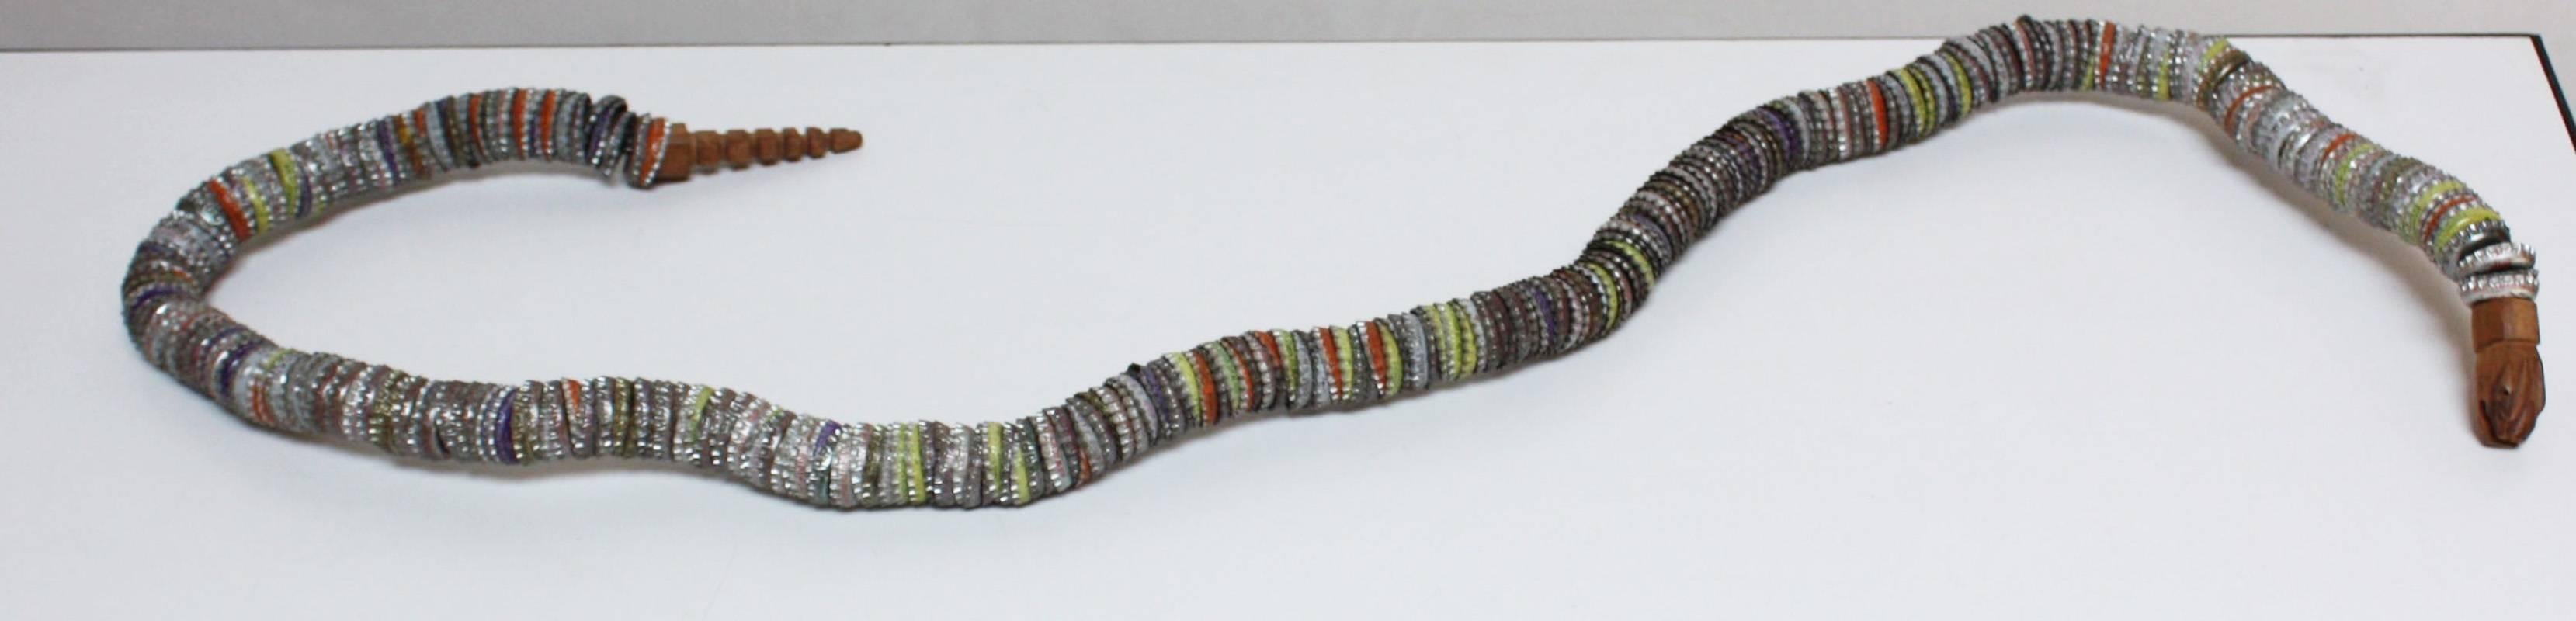 This Felipe Archuleta-style folk art snake is comprised of bottlecaps, a carved wood head and rattle, wire and adhesive. The piece is not painted; the artist employed caps in lime green, orange and blue (among others) to give the body a natural